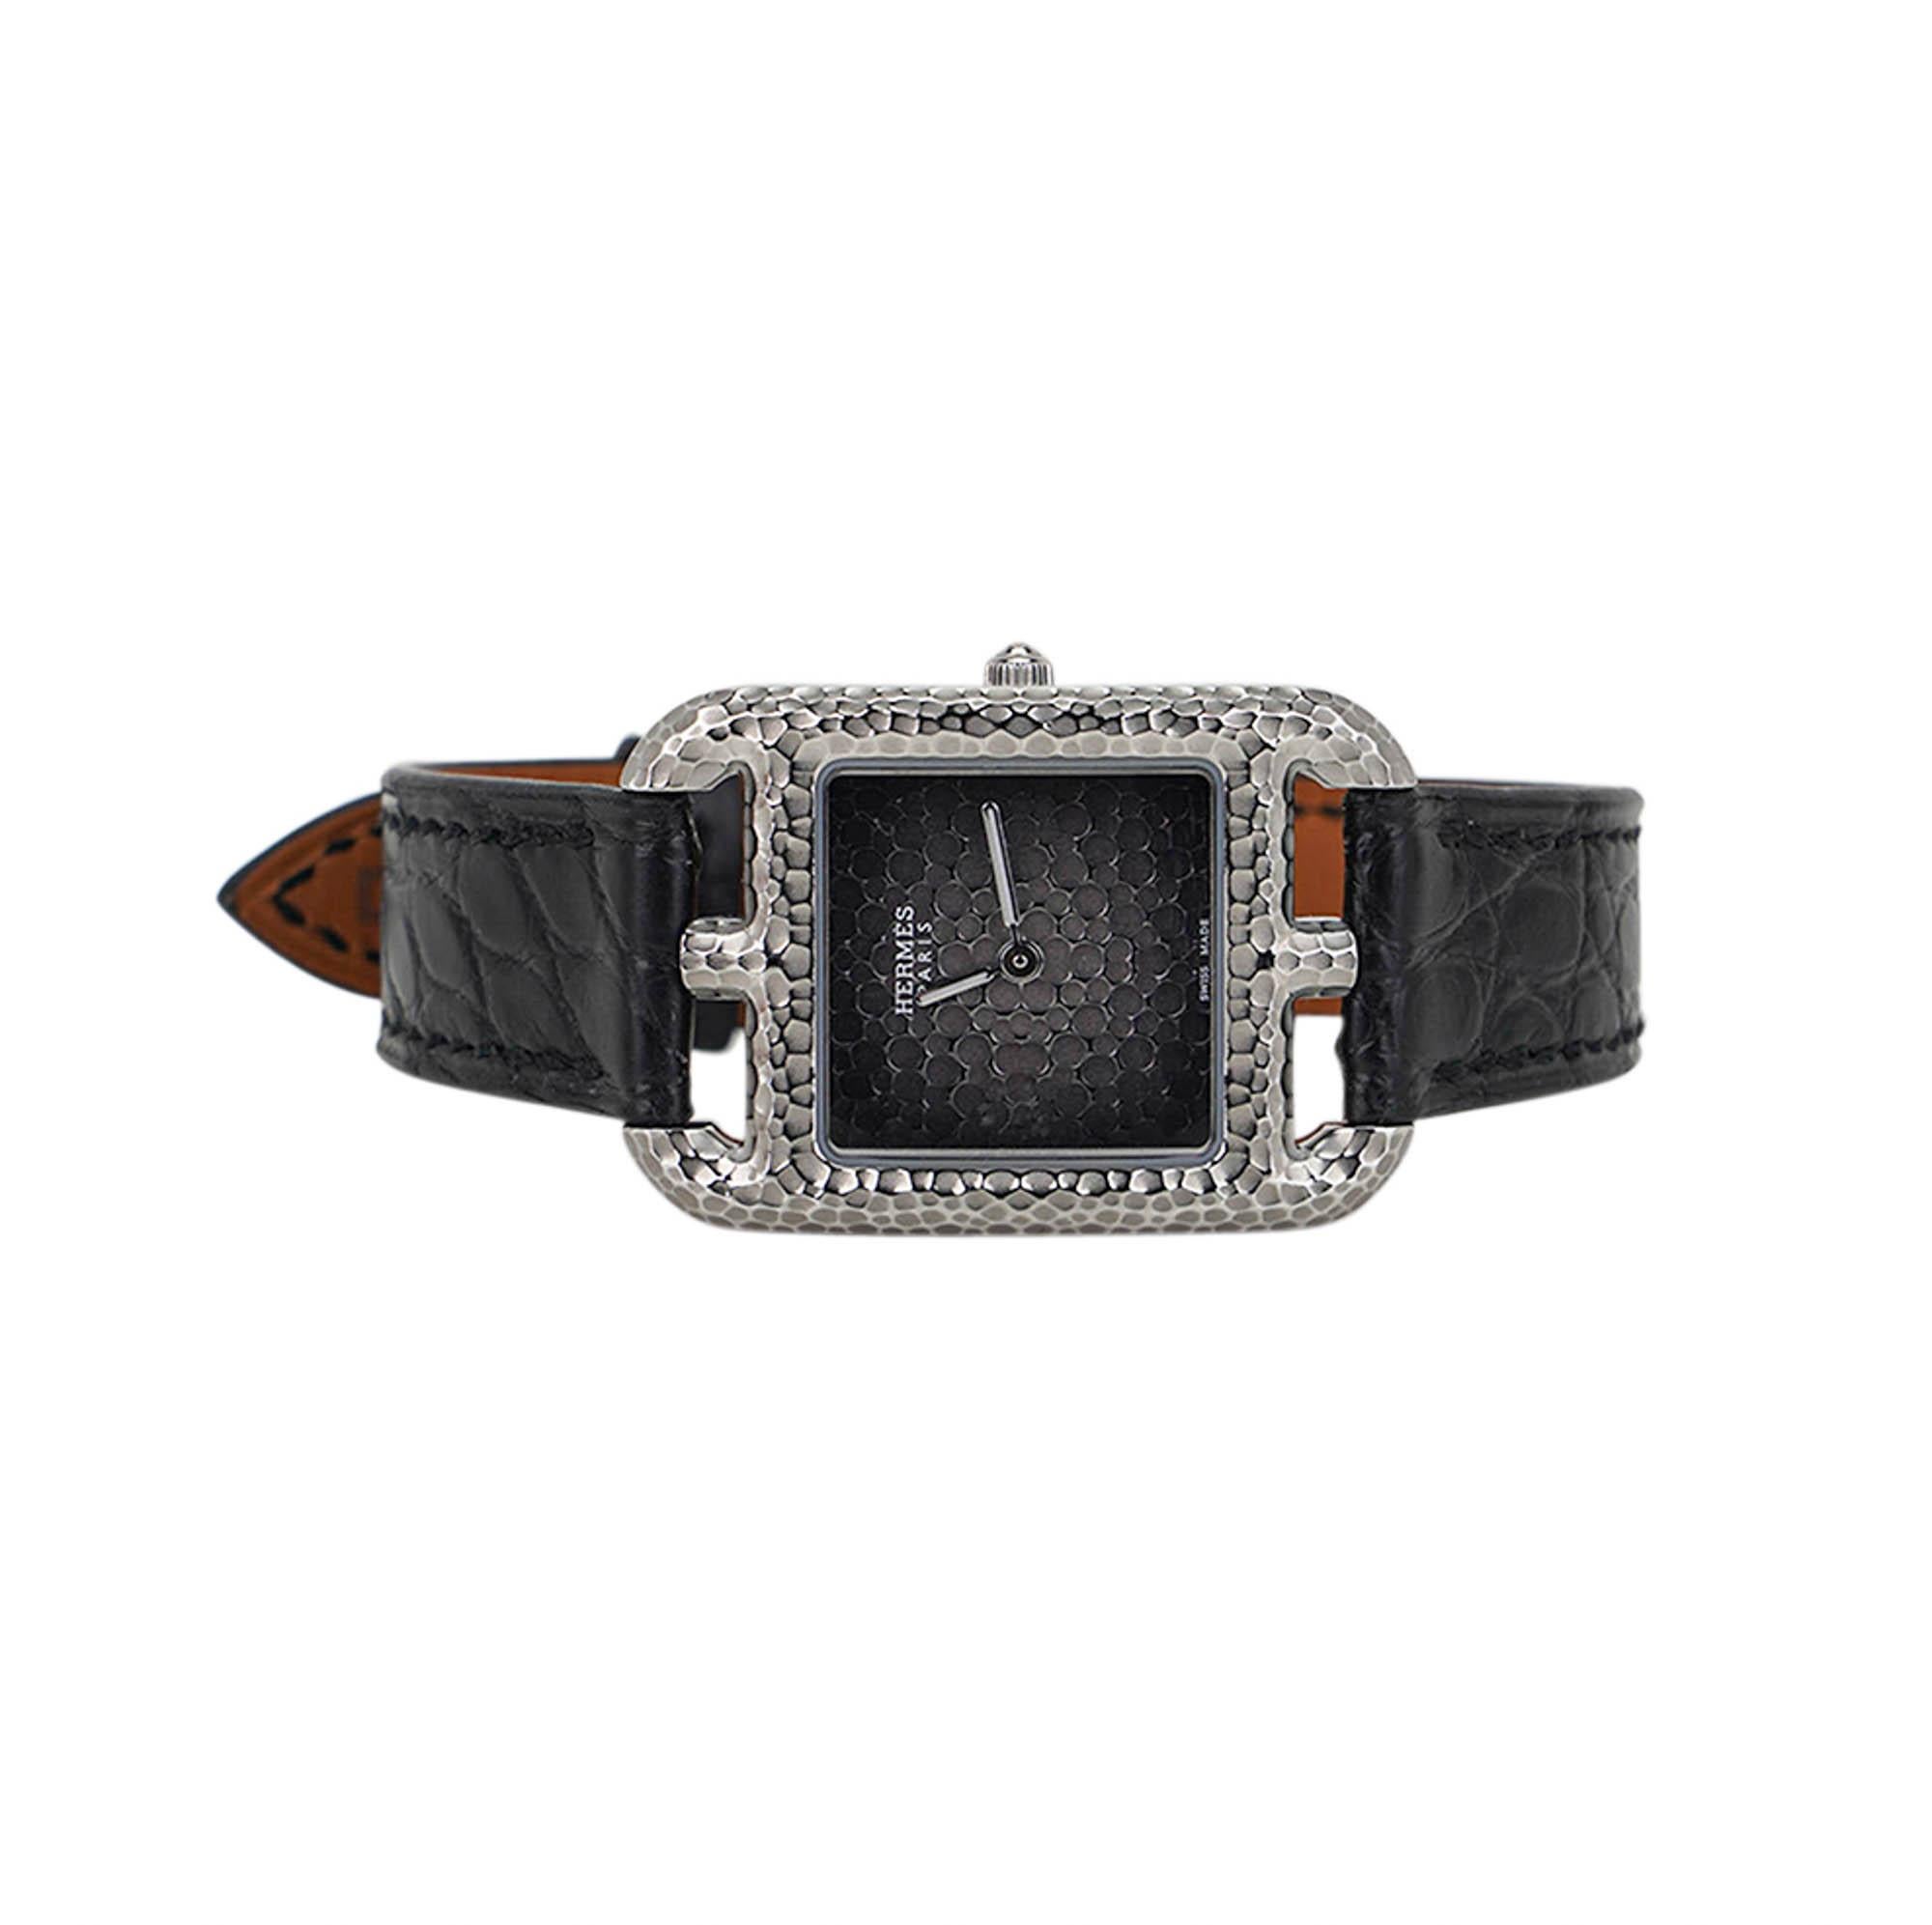 Mightychic offers an Hermes Cape Cod quartz watch featured in hammered stainless steel.
This edgy version of Henri d'Origny's 1991 Chaine d'Ancre inspired design features a hammered surface of the case.
Black to Grey shaded dial is laquared to the